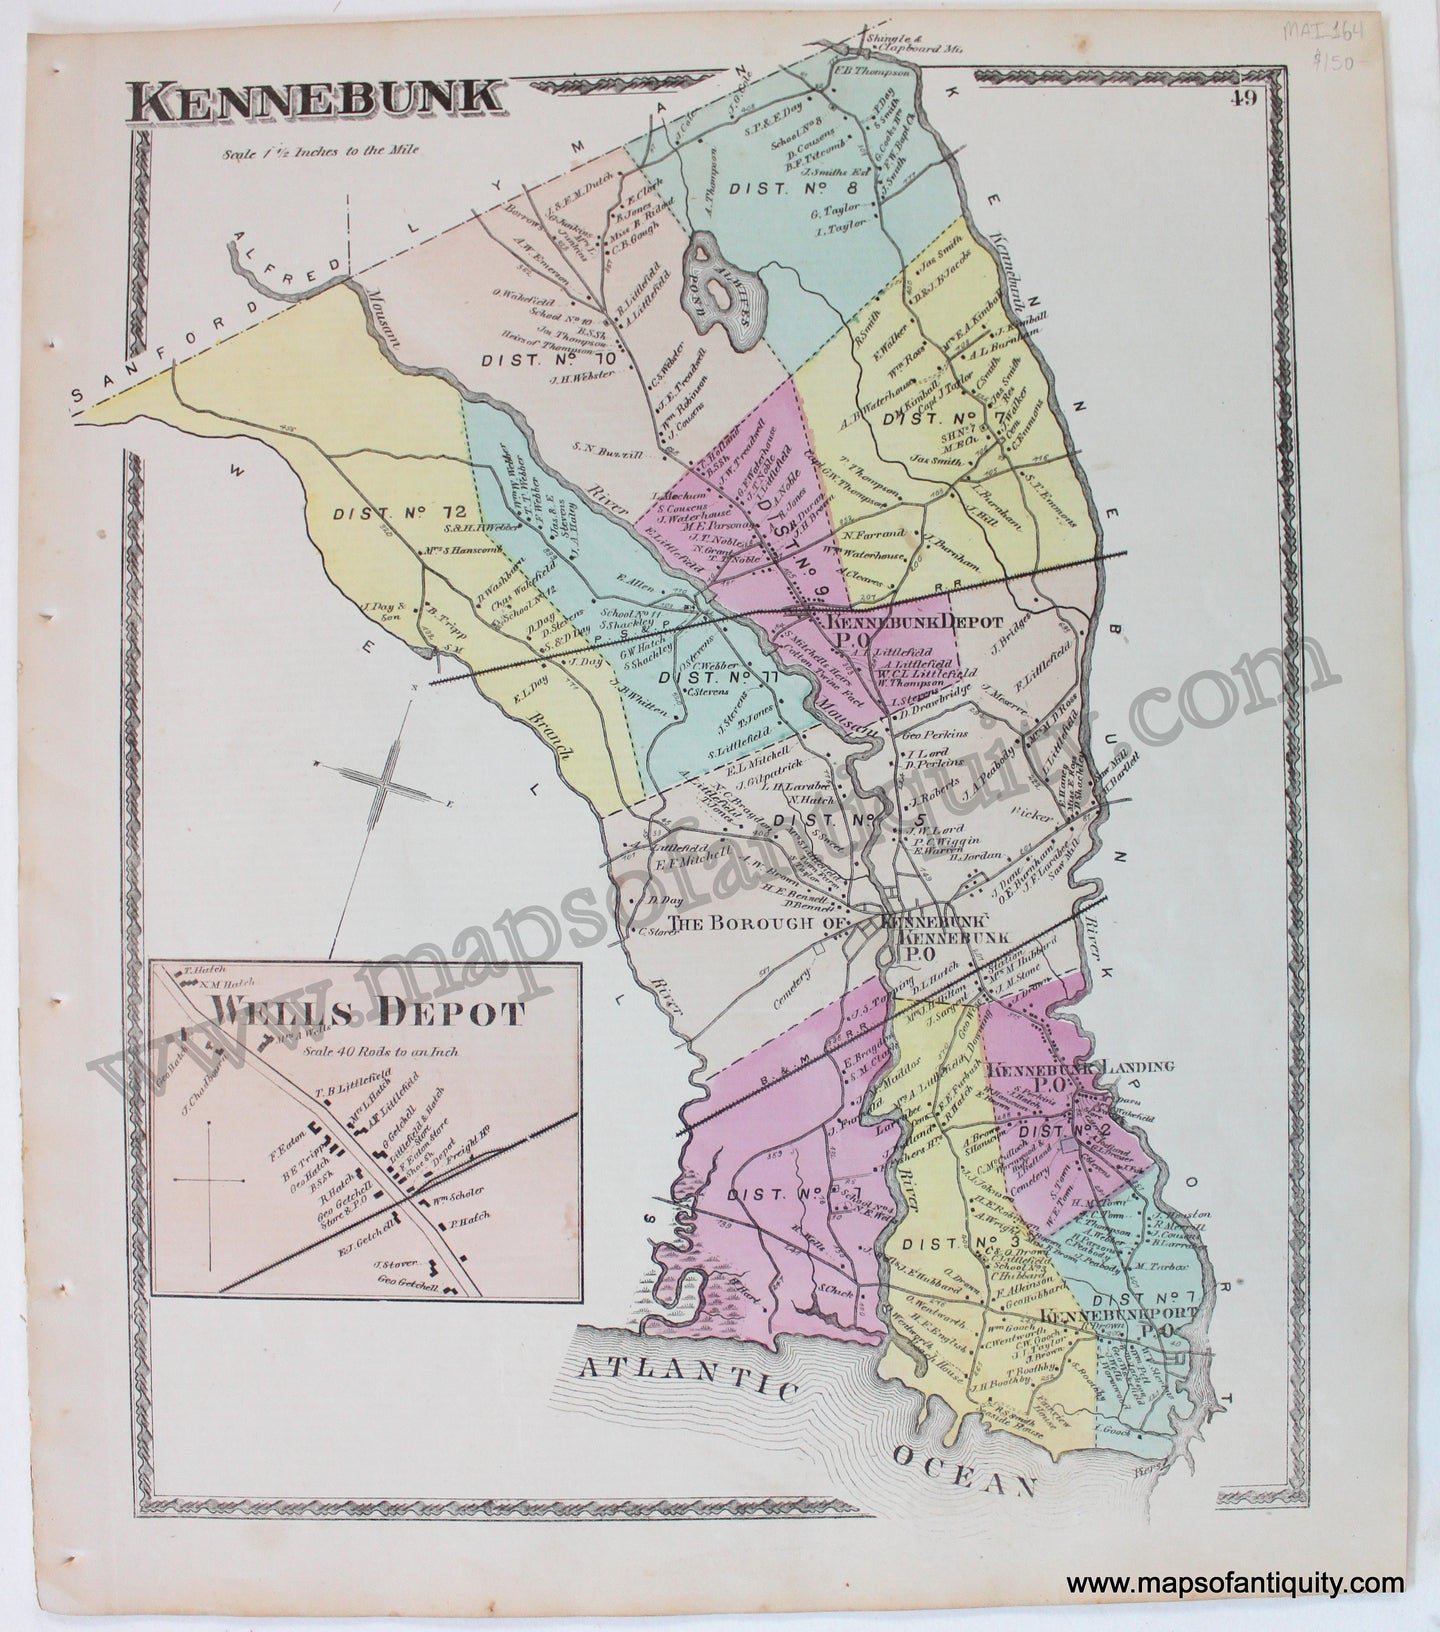 Kennebunk-Wells-Depot-York-County-Maine-Antique-Map-1872-Sanford-Everts-1870s-1800s-19th-century-Maps-of-Antiquity